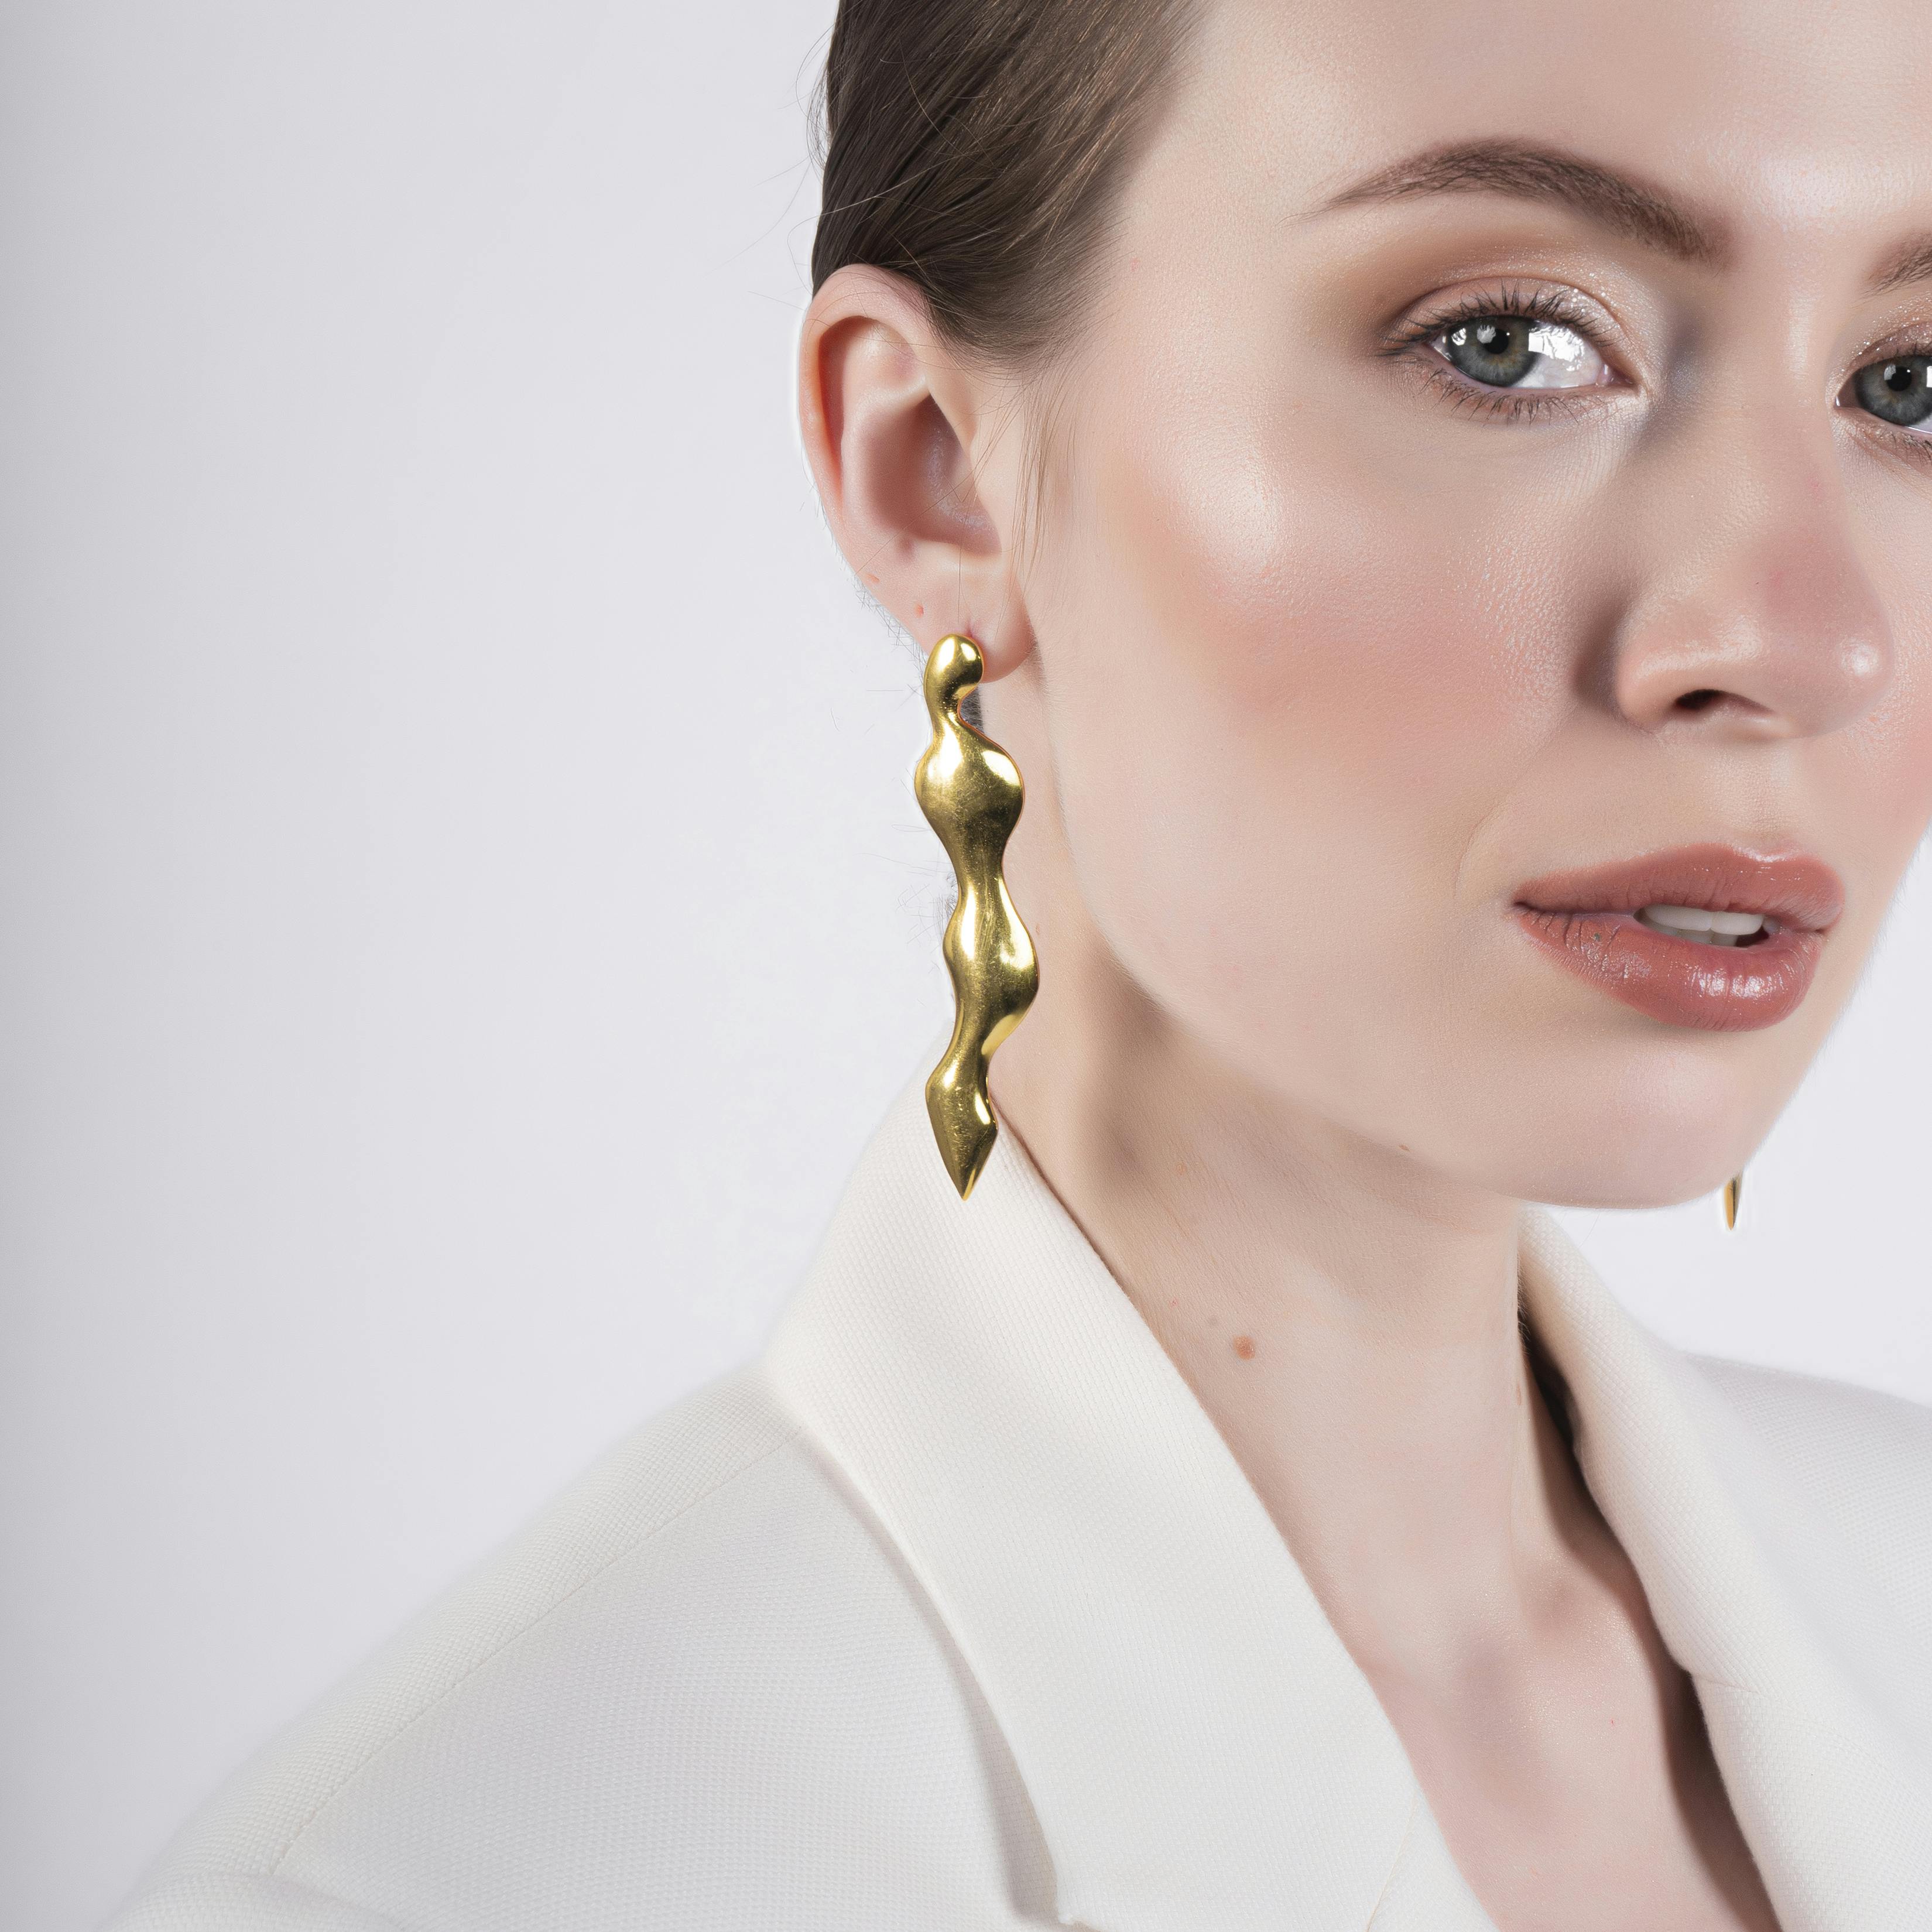 WATER STREAM EARRINGS - GOLD TONE, a product by Equiivalence